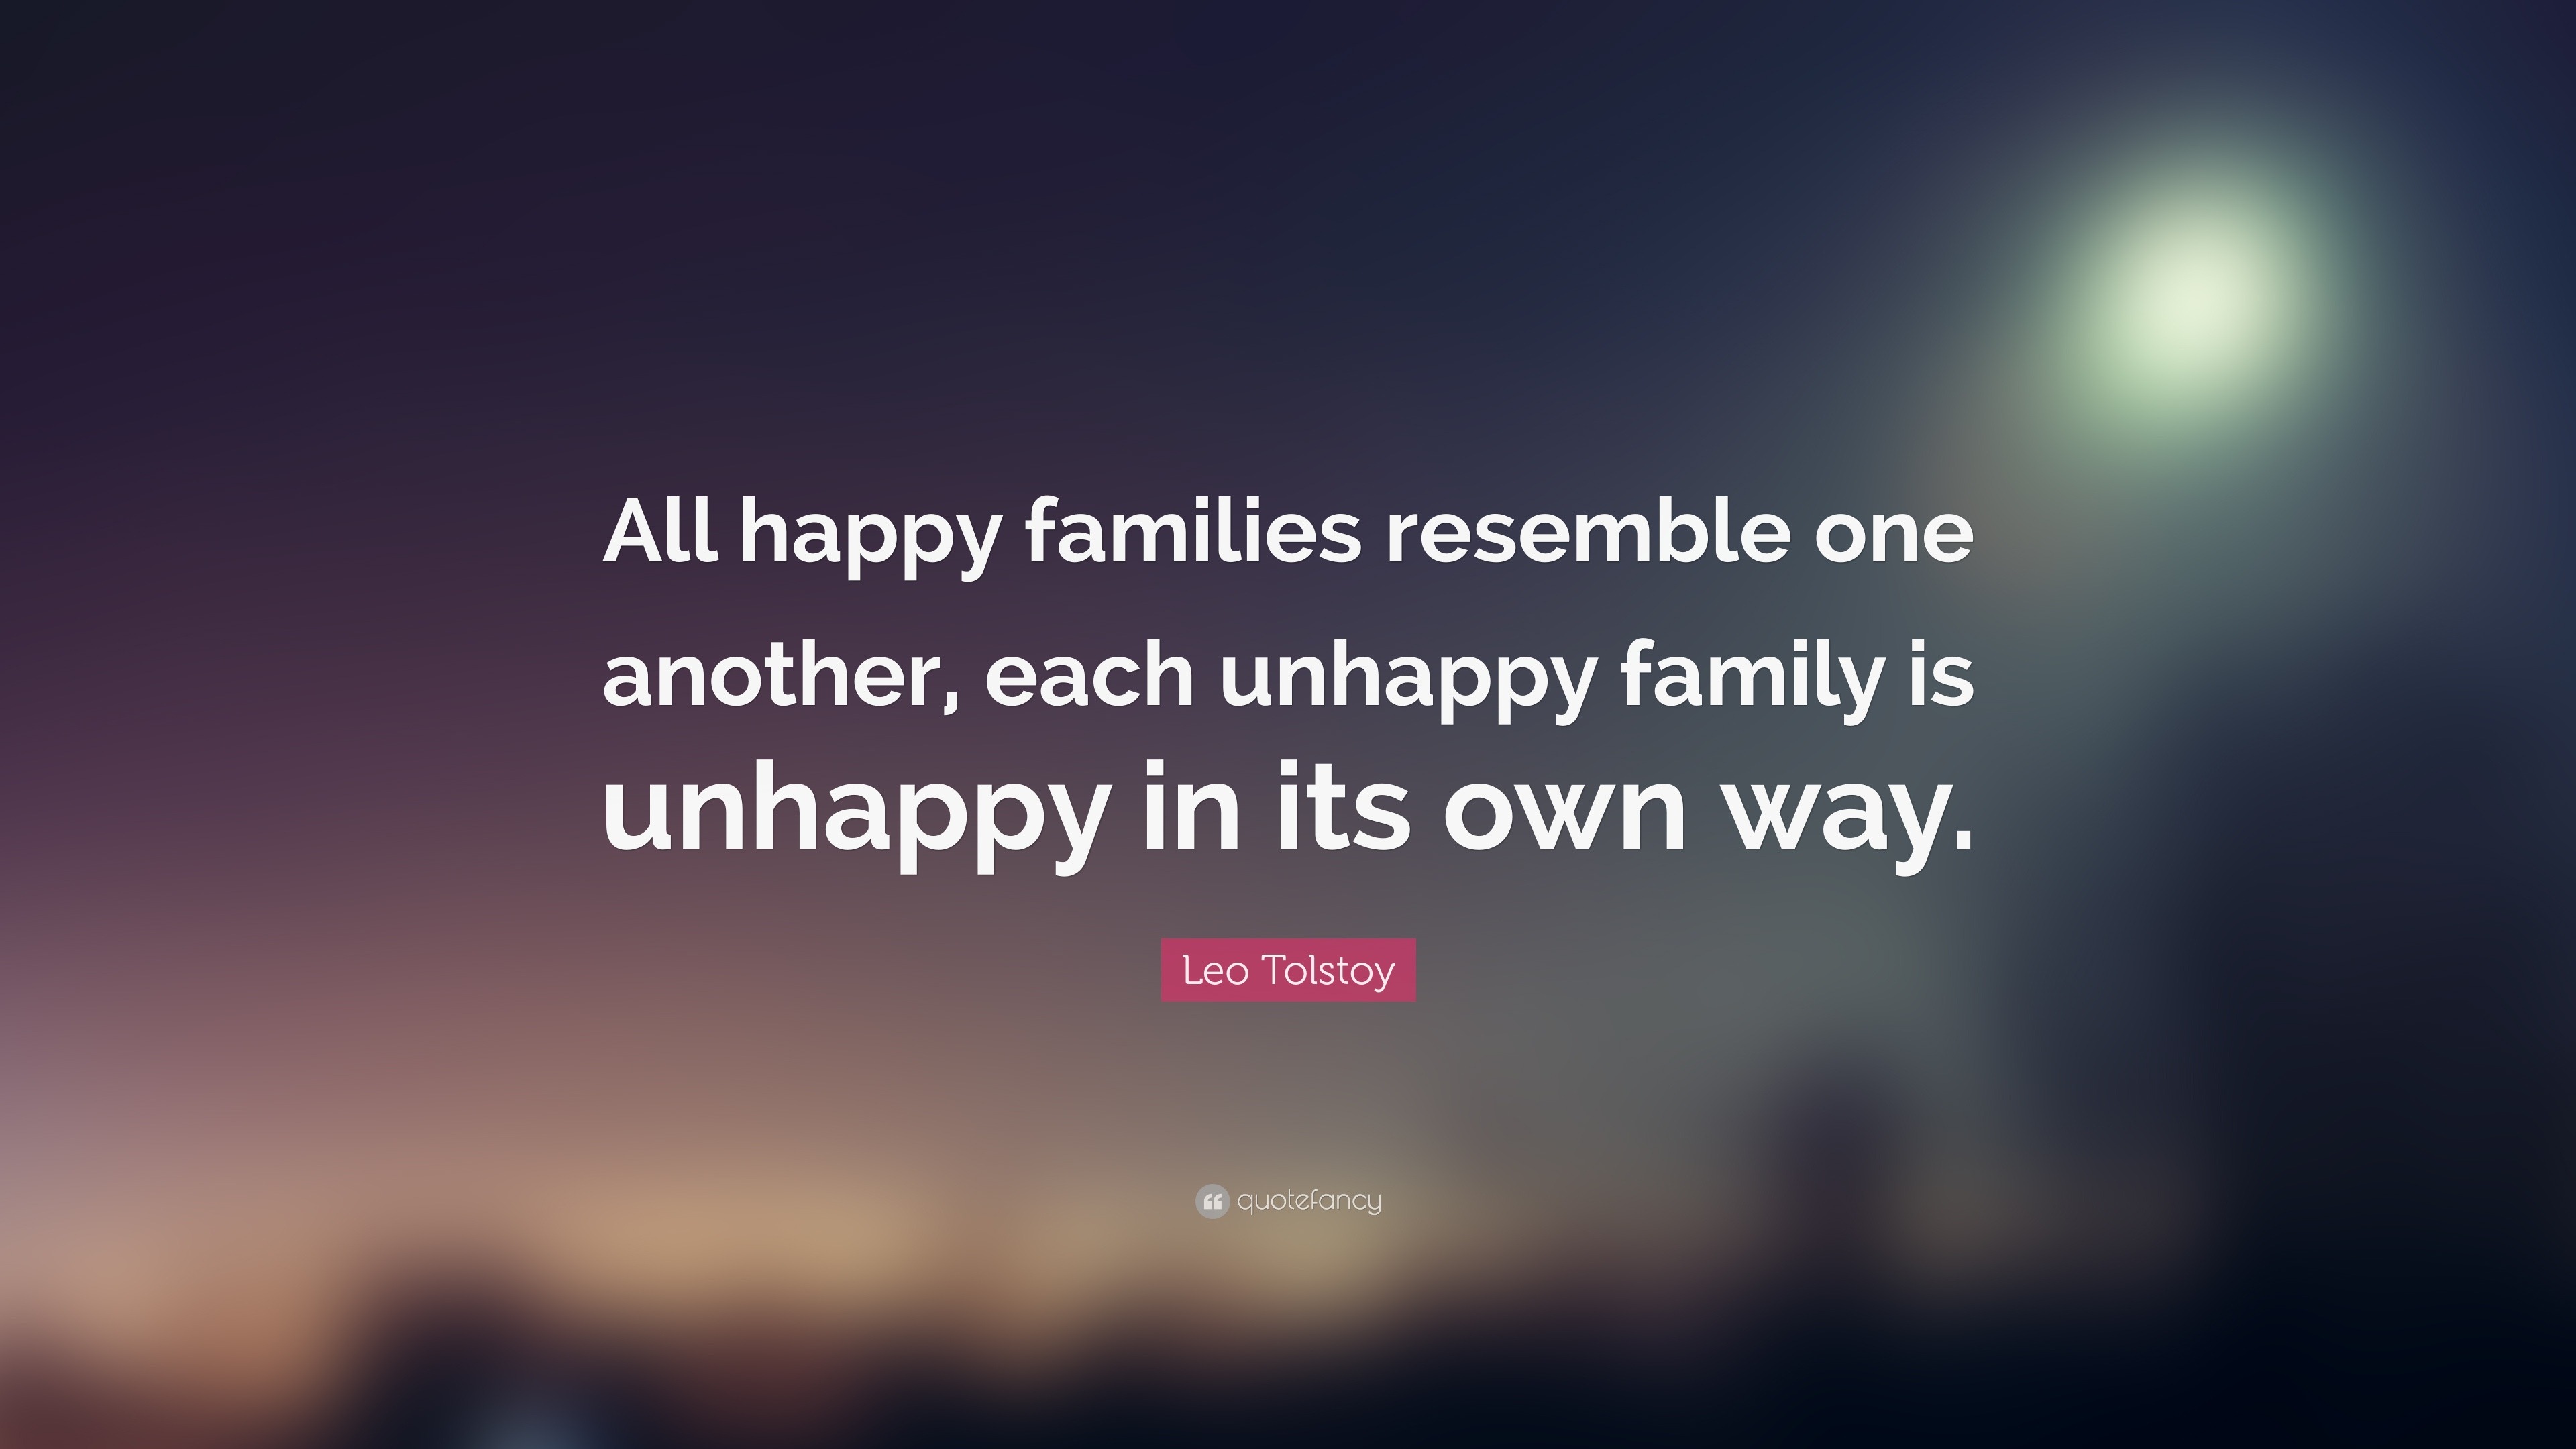 Tolstoy family happiness